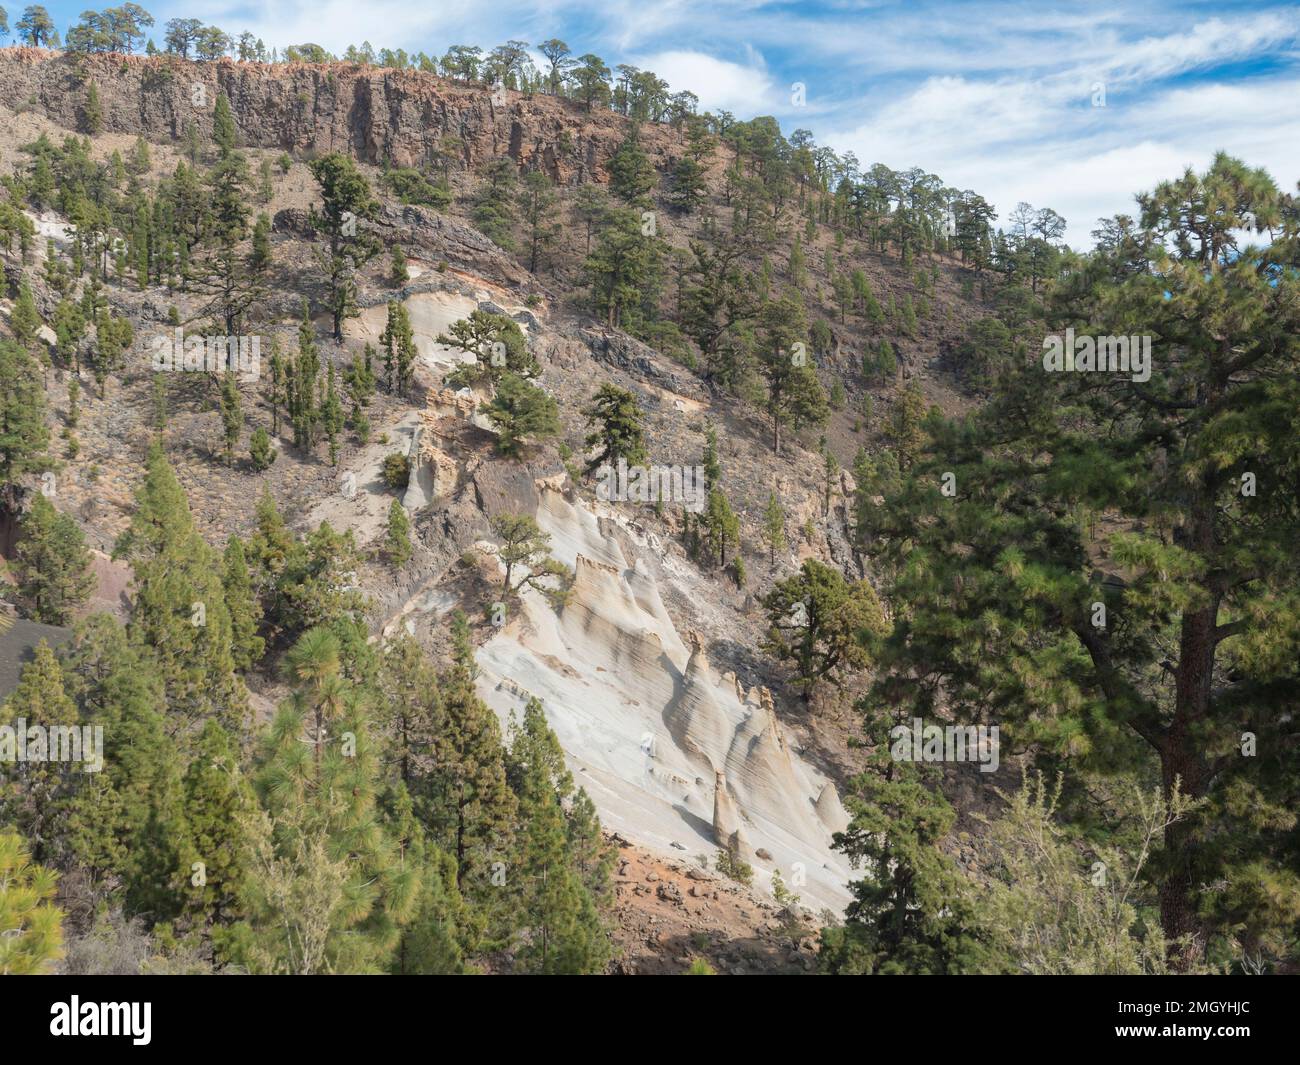 View of small rock city Paisaje Lunar, eroded rock pillars formation in Volcanic landscape with lush green pine tree forest. Tenerife Canary islands Stock Photo